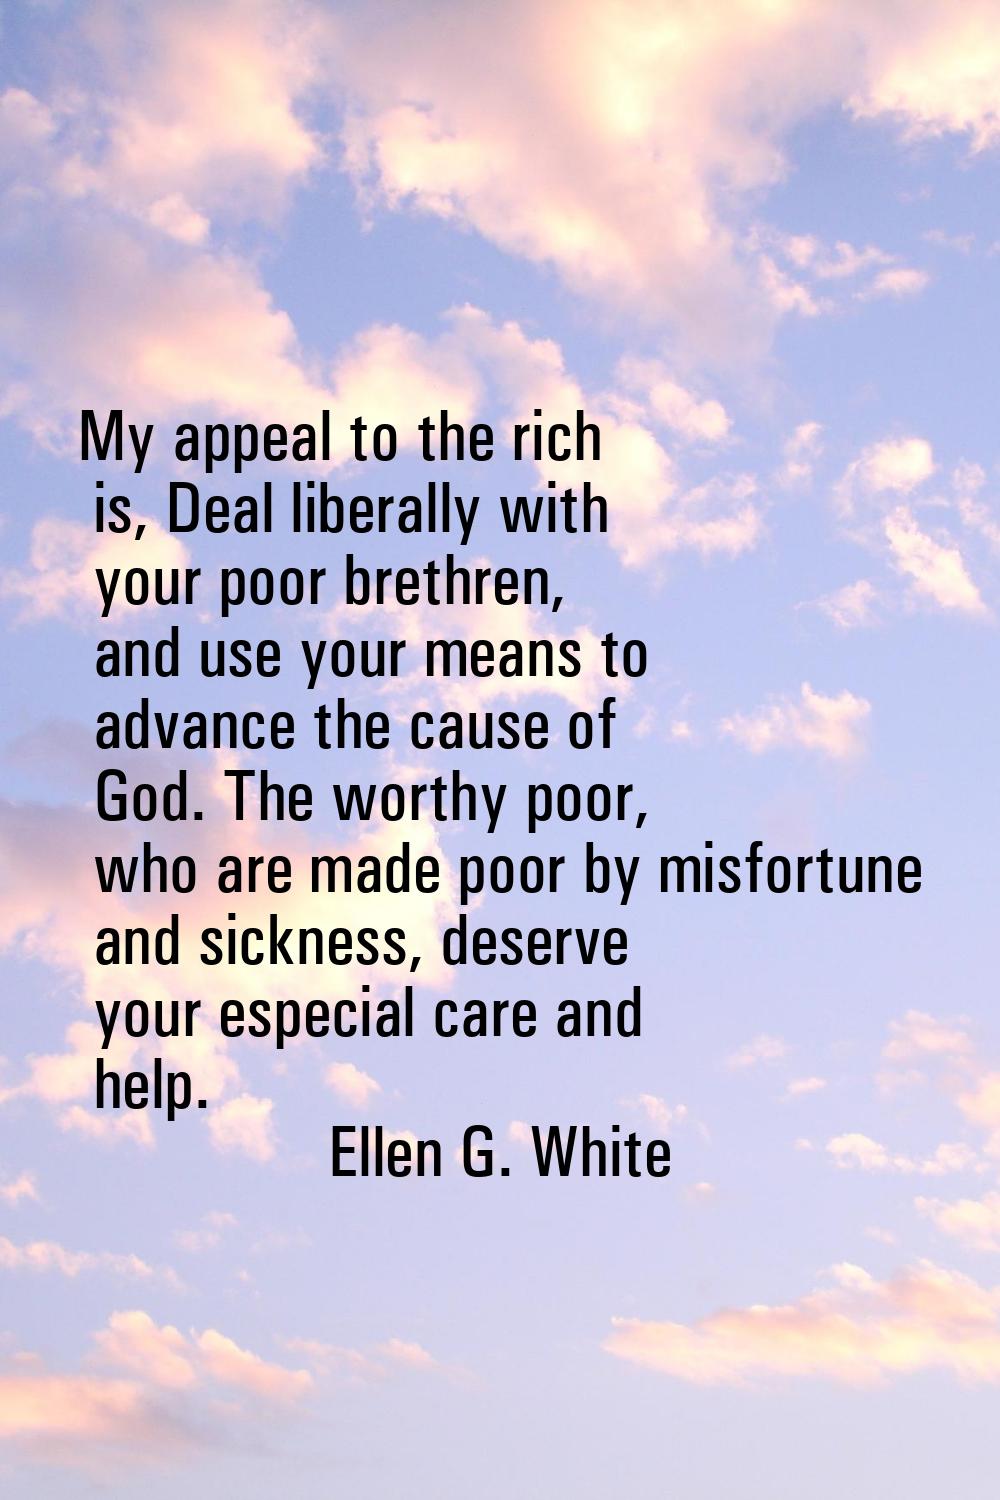 My appeal to the rich is, Deal liberally with your poor brethren, and use your means to advance the